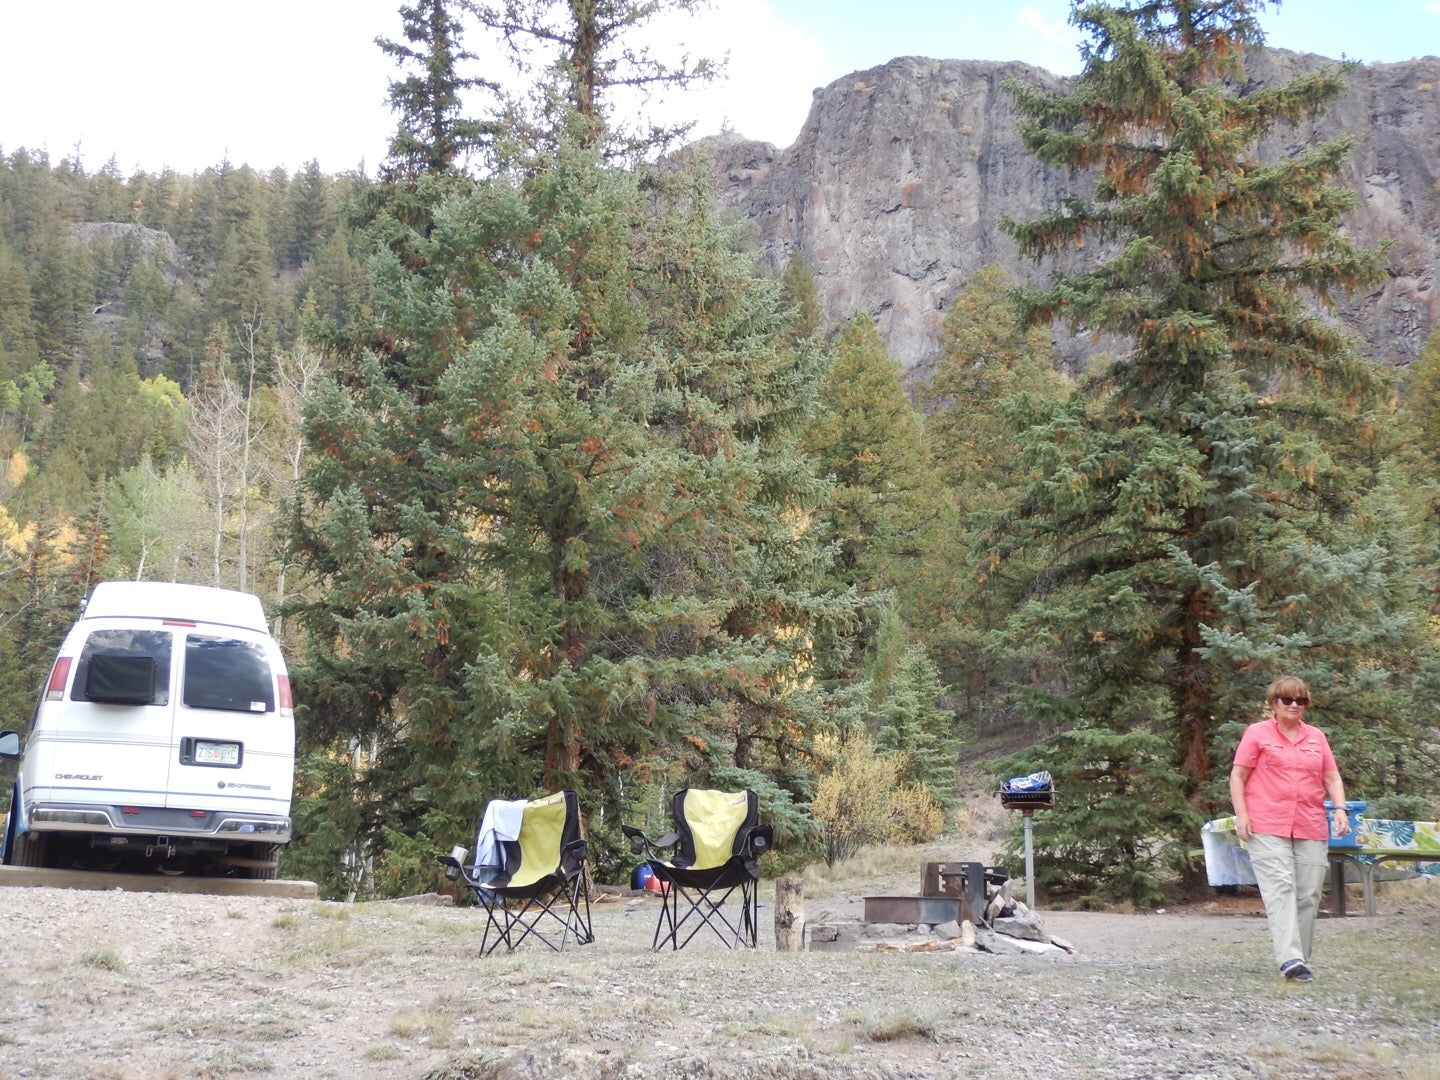 Camper submitted image from Wupperman Campground - 4